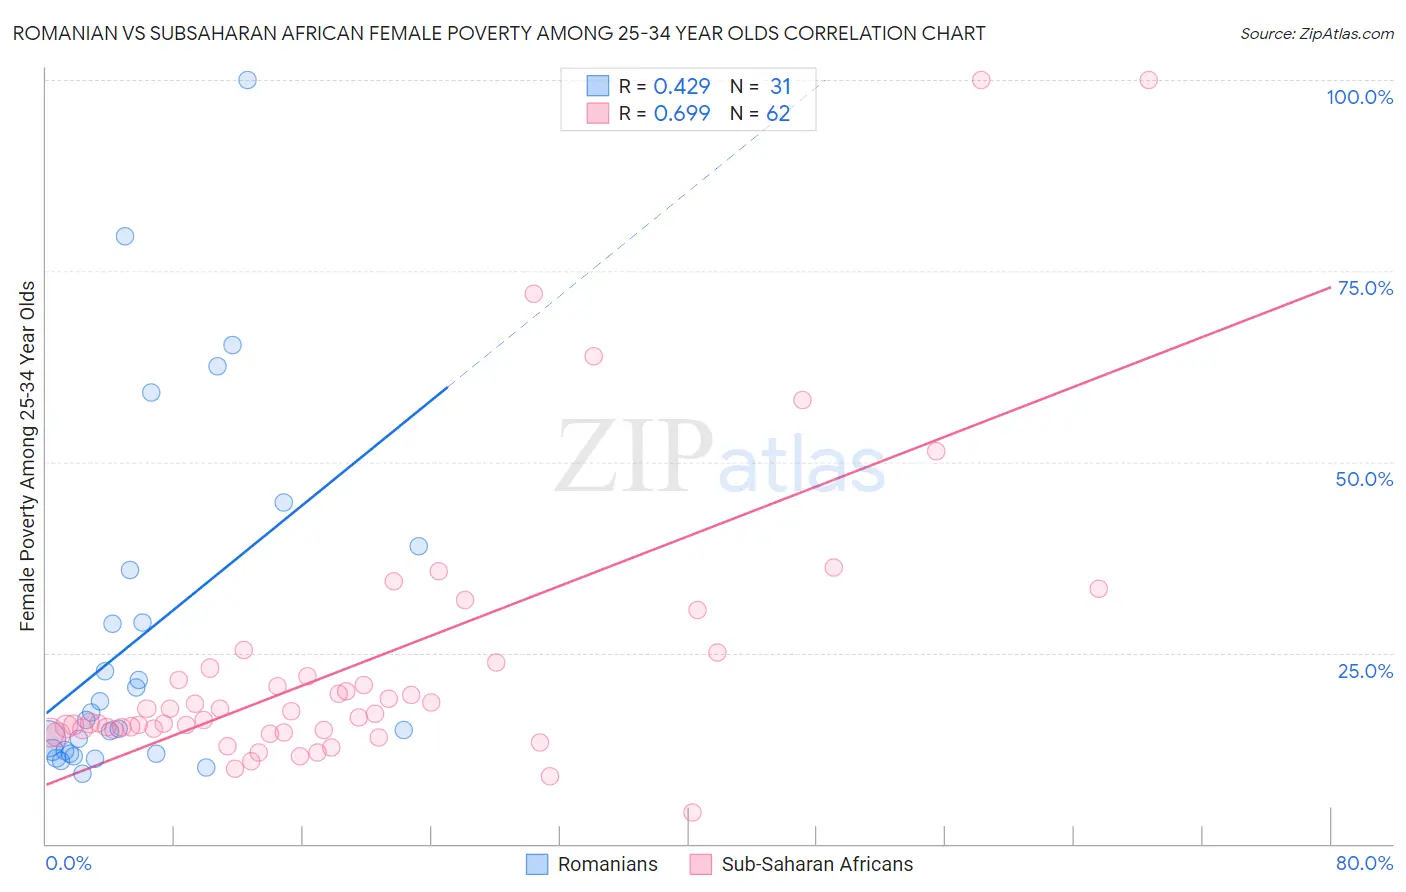 Romanian vs Subsaharan African Female Poverty Among 25-34 Year Olds